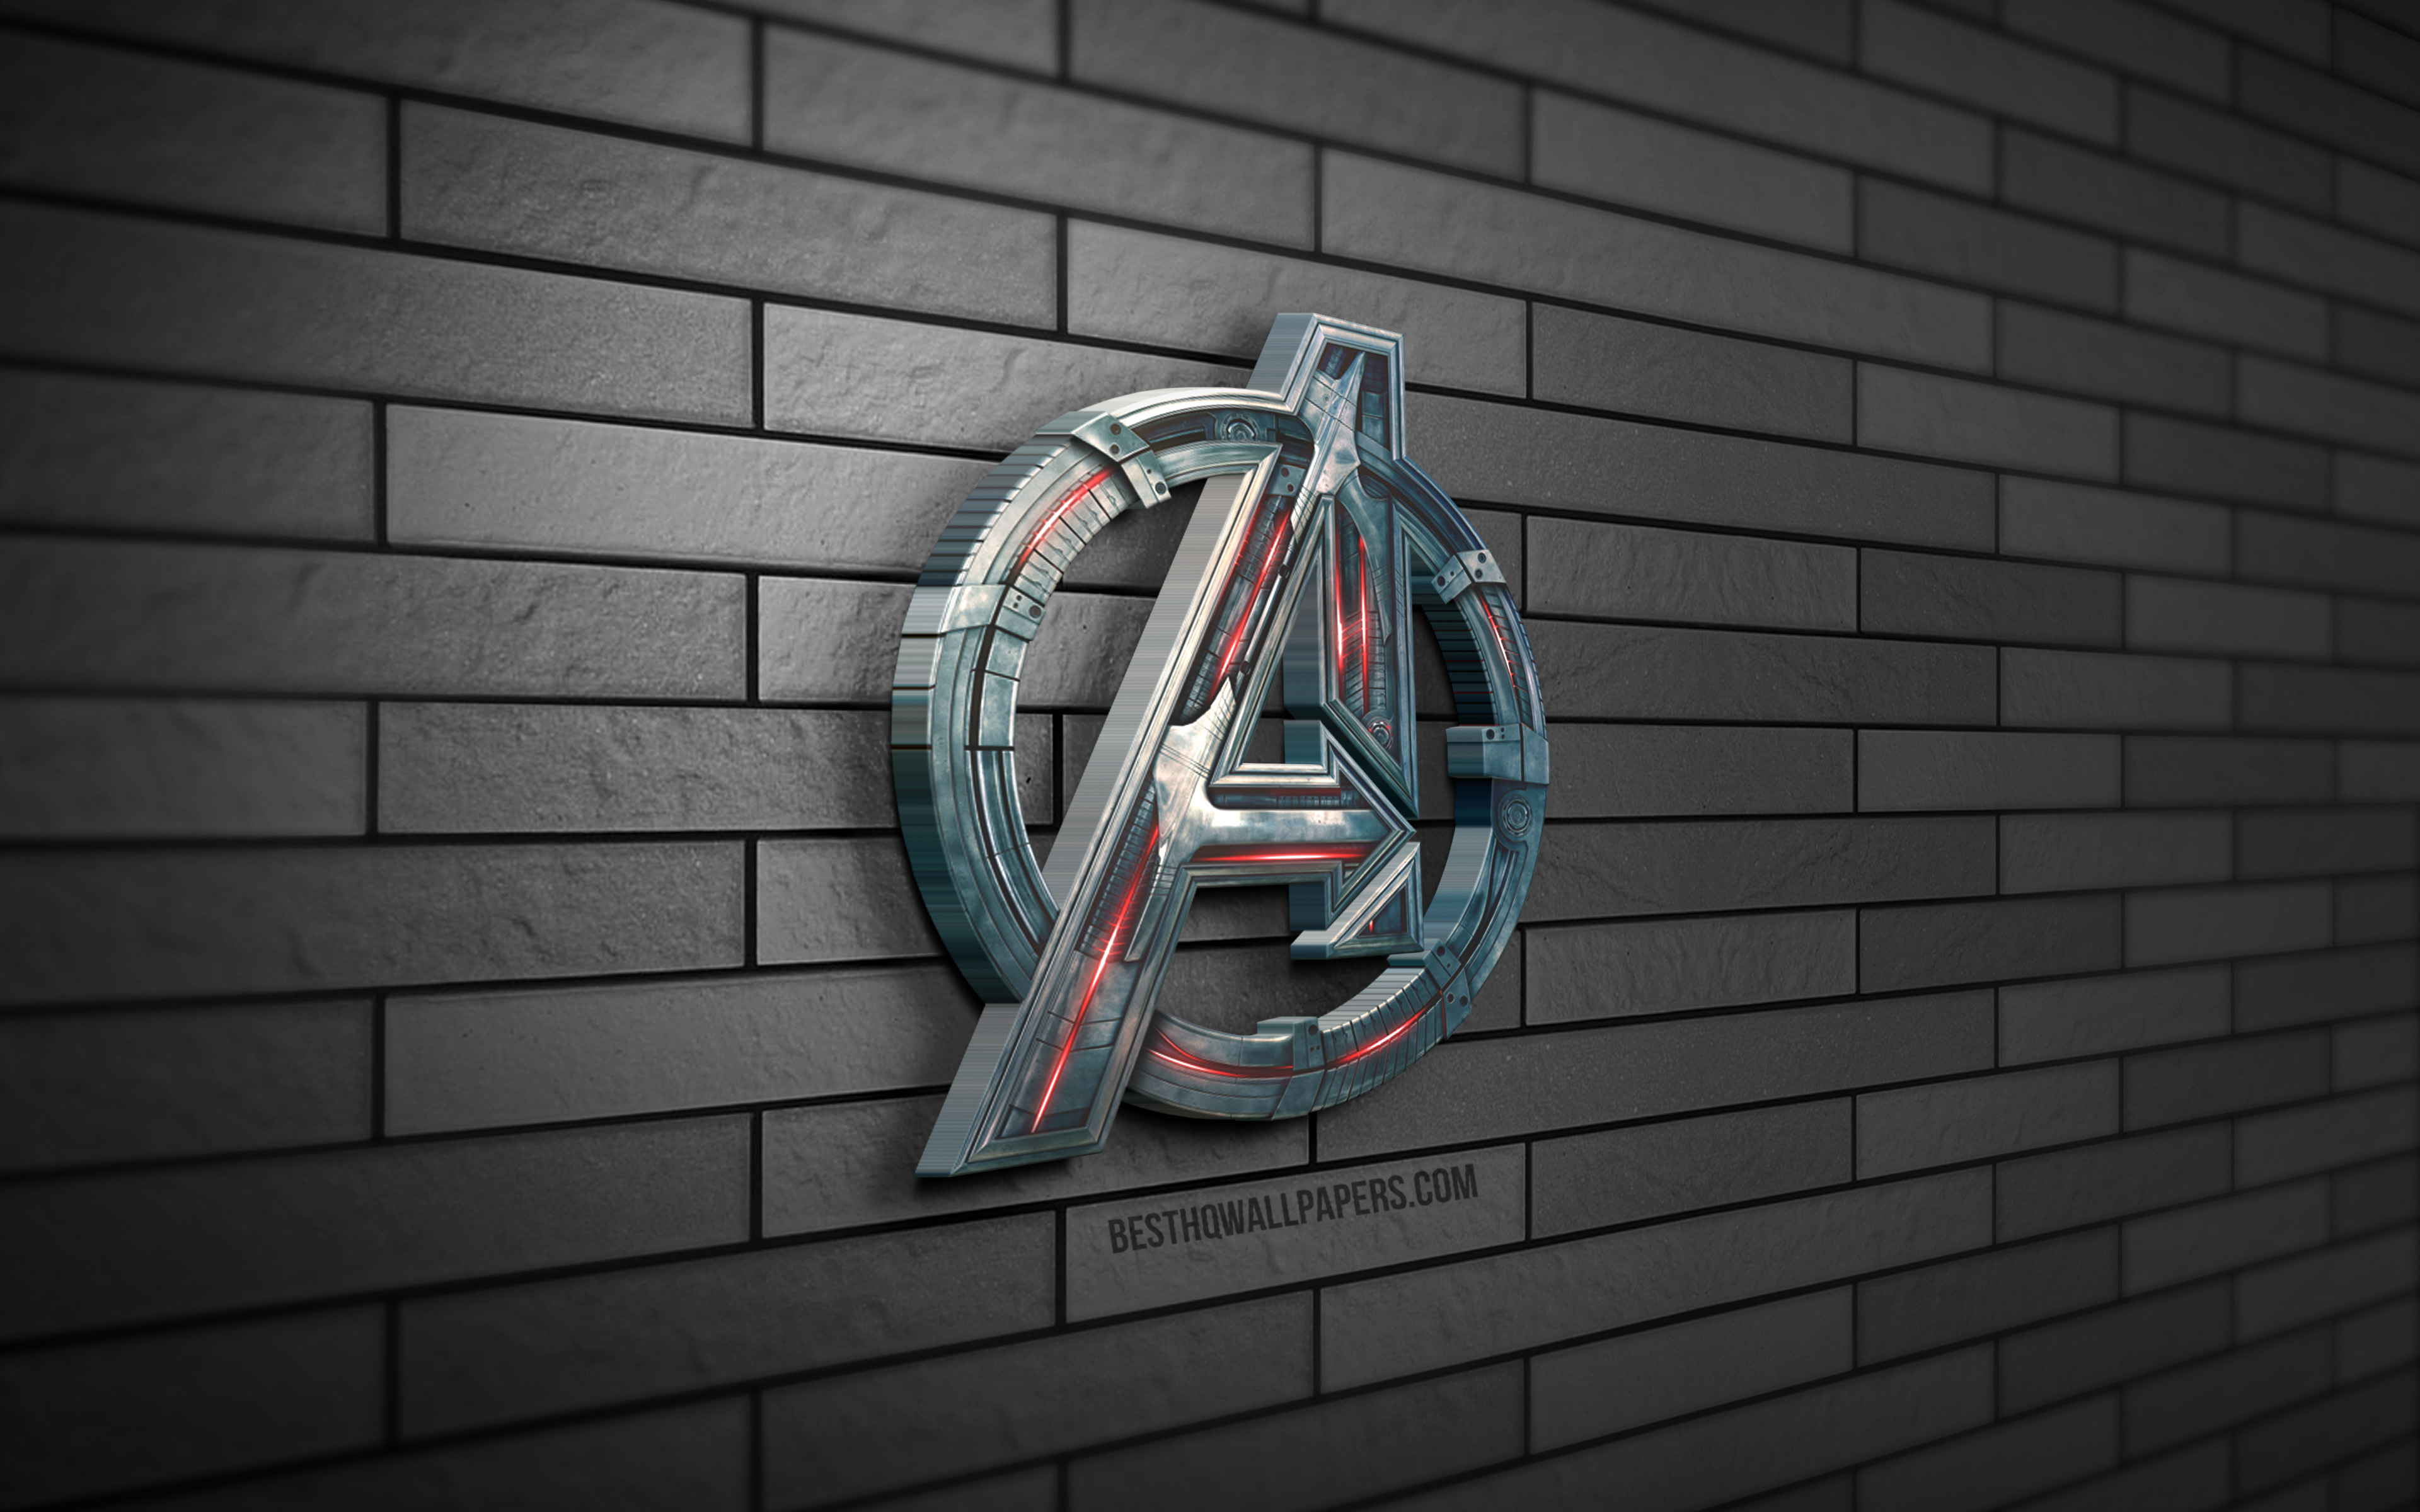 Download wallpapers Avengers red logo, 4k, red brickwall, Avengers logo,  superheroes, Avengers neon logo, Avengers for desktop with resolution  3840x2400. High Quality HD pictures wallpapers